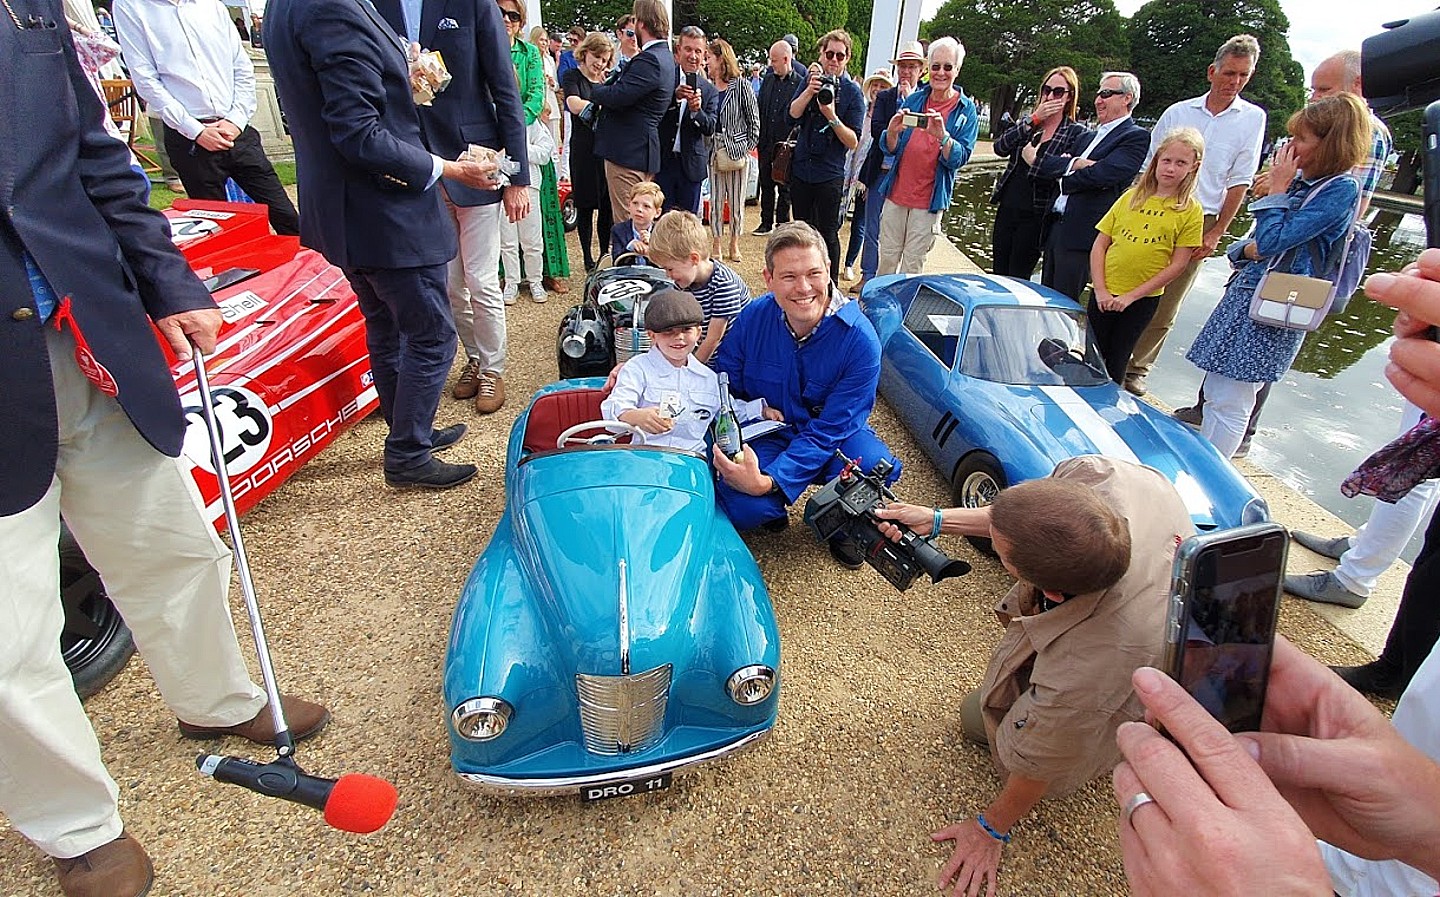 Austin J40 pedal car at the 2020 Concours of Elegance Junior Concours